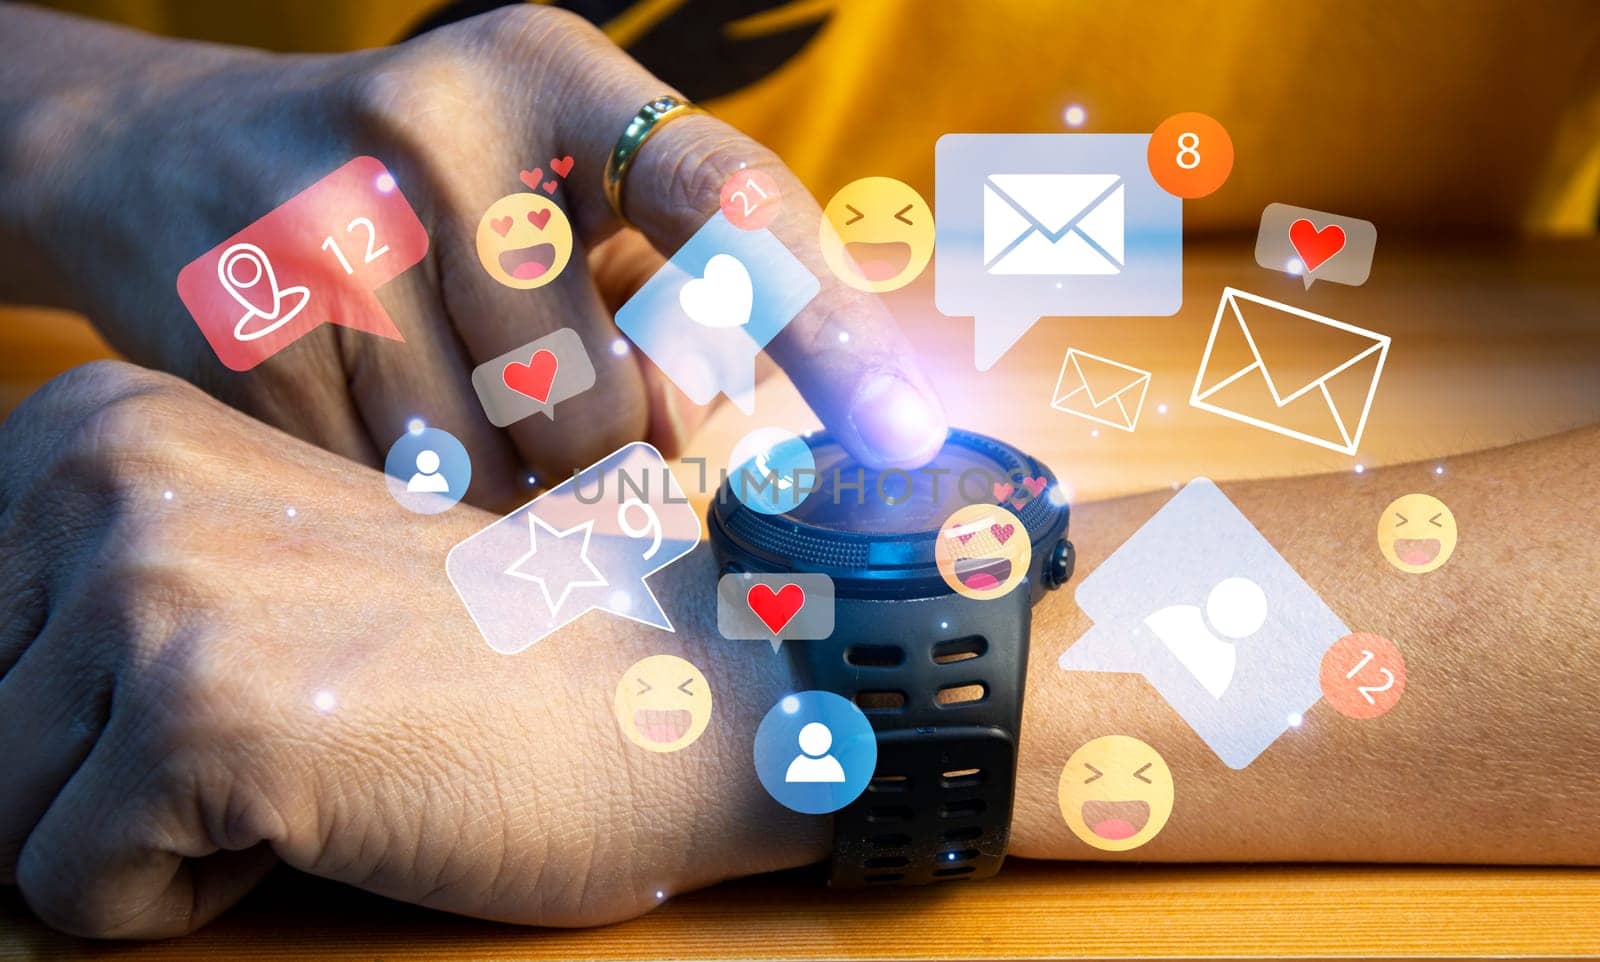 Use of social media and digital smartwatches The concept of living on vacation and playing social media. online marketing Connecting technology networks in global business by boonruen